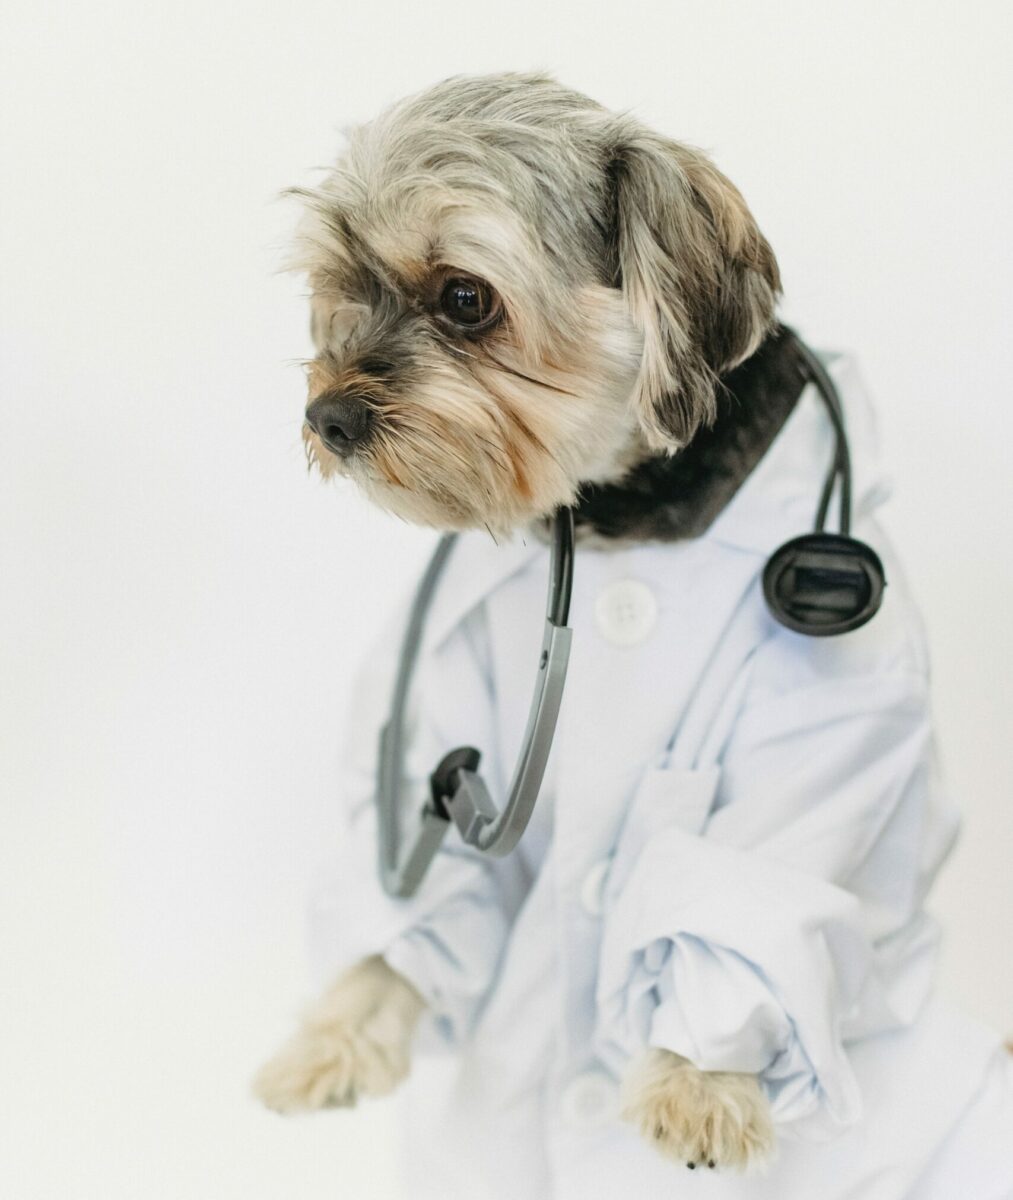 Involving your dog or whoever into your studying to make it more fun: a dog with a stethoscope around its neck